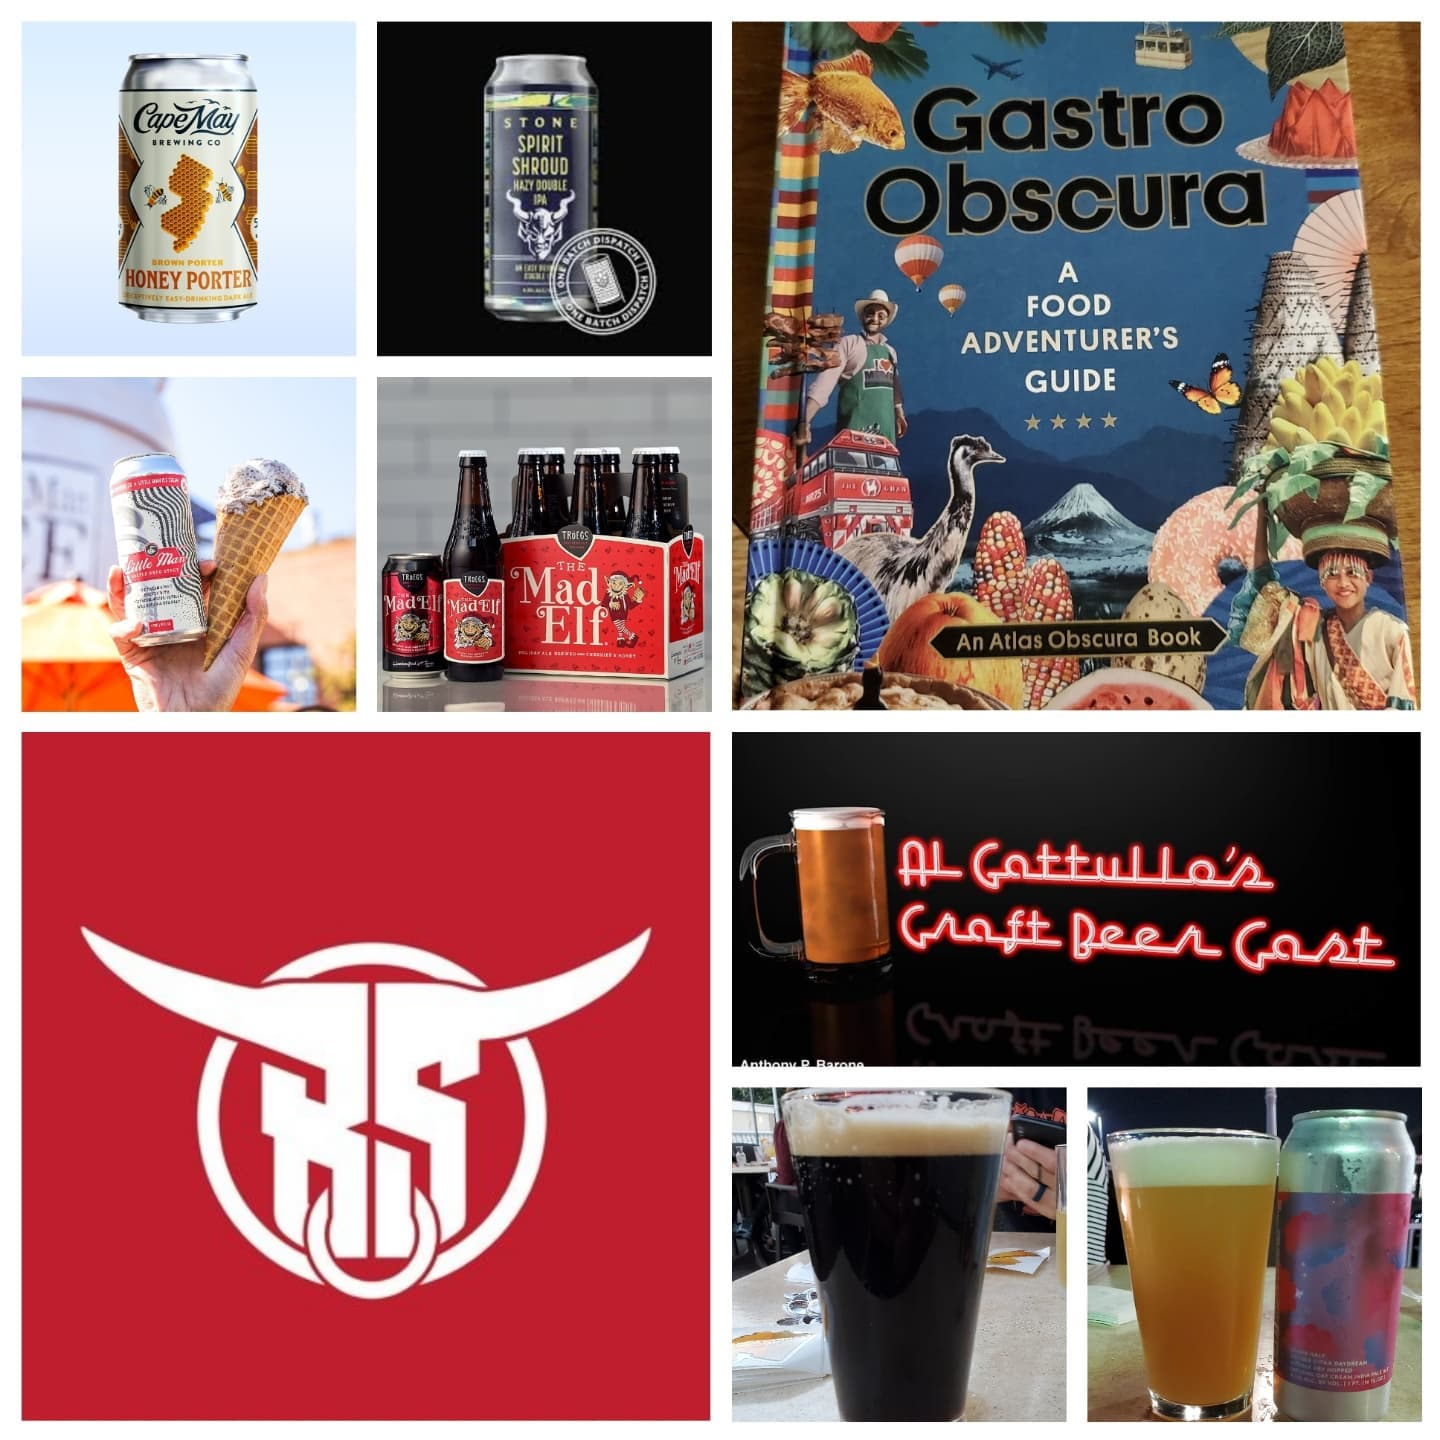 AG Craft Beer Cast 10-24-21 Gastro Obscura